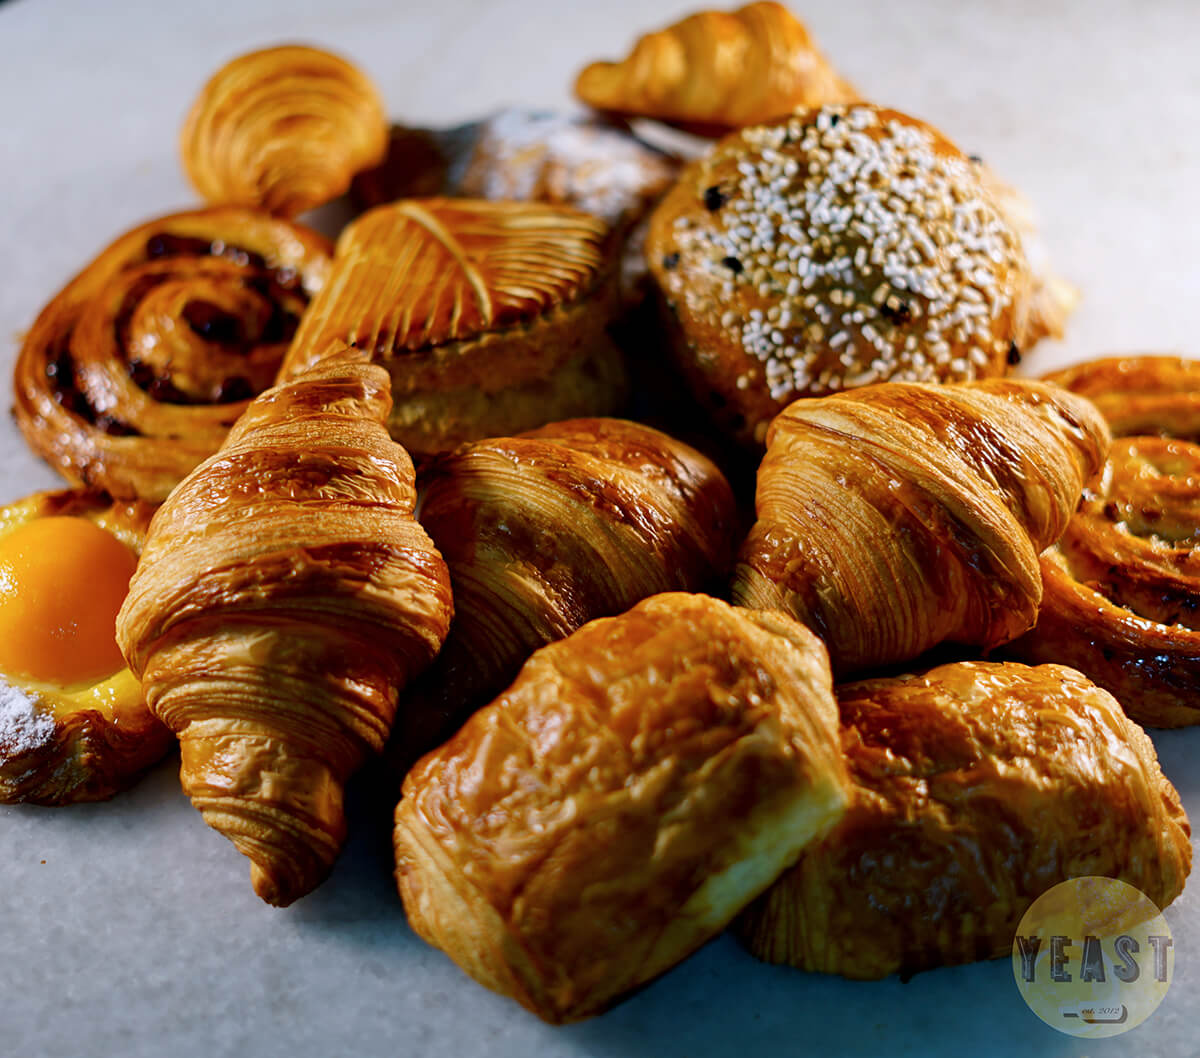 For light bites, Yeast also provides a vast array of pastries such as pain au chocolat (translates to chocolate bread) and croissants that customers can grab to-go.